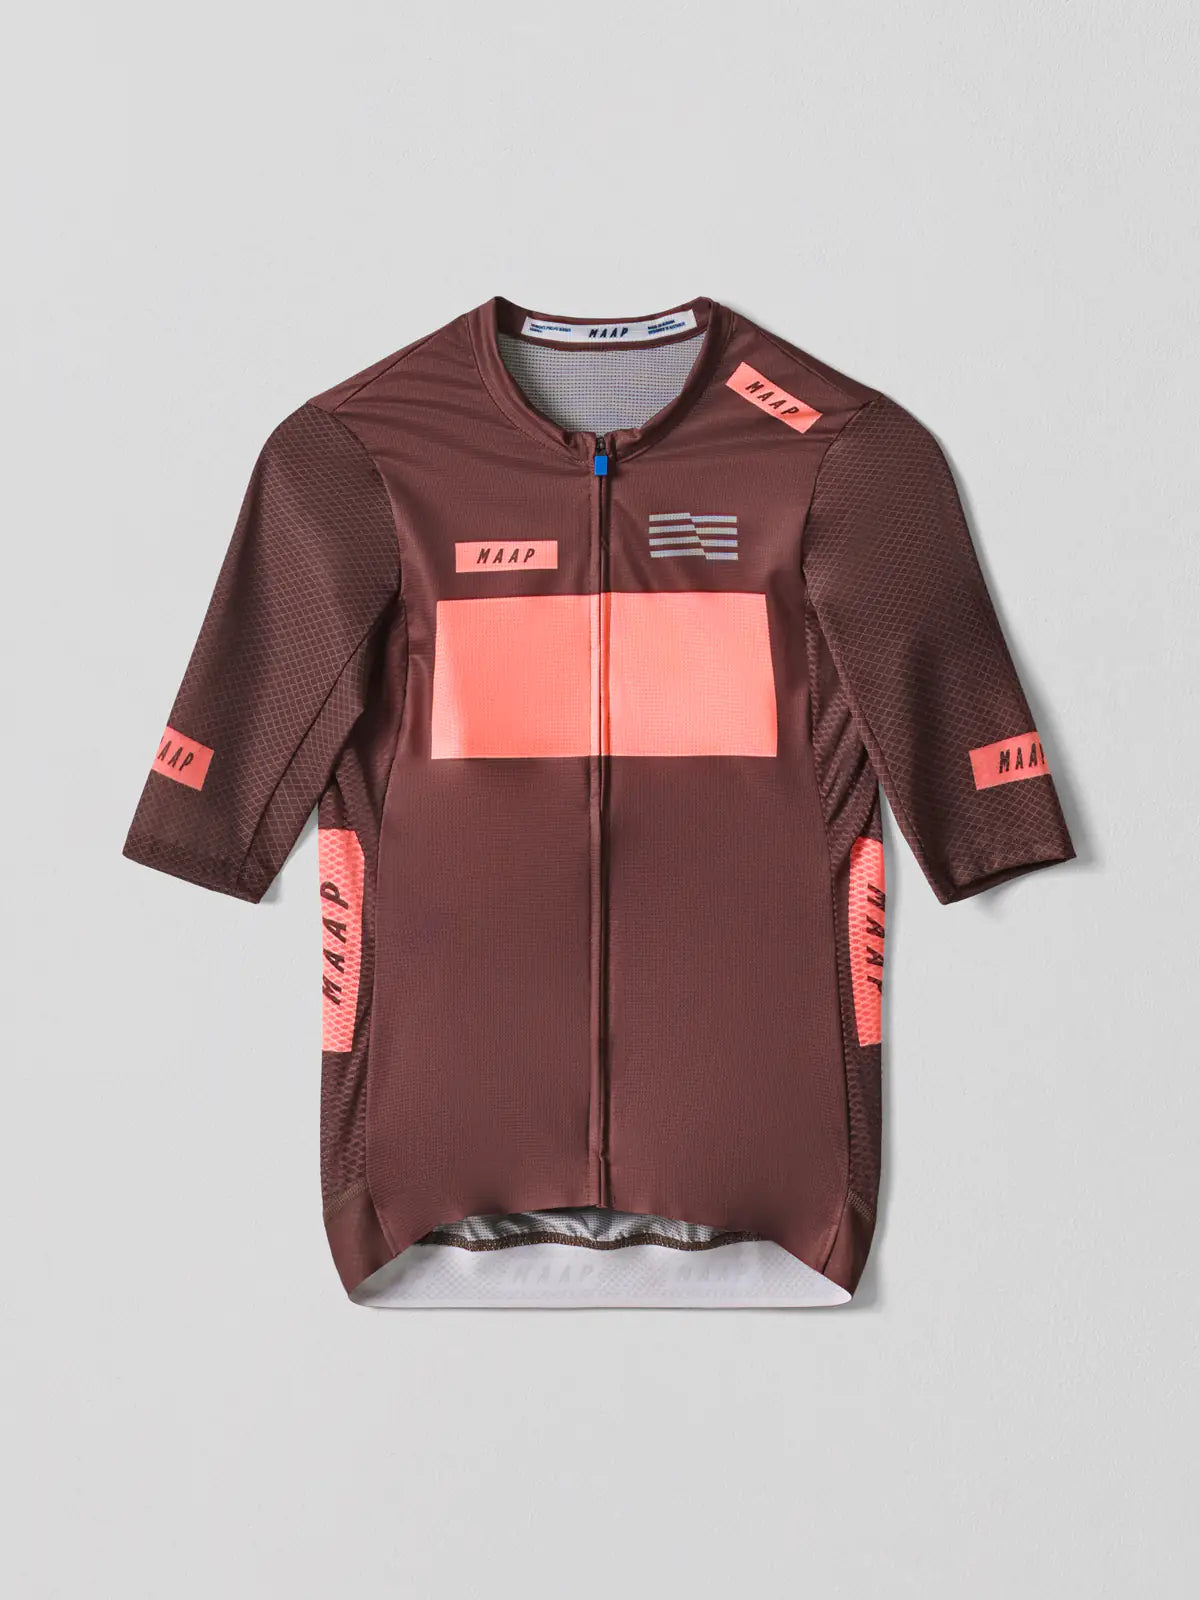 MAAP System Pro Air Jersey Muscat レディース サイクル ジャージ | CYCLISM